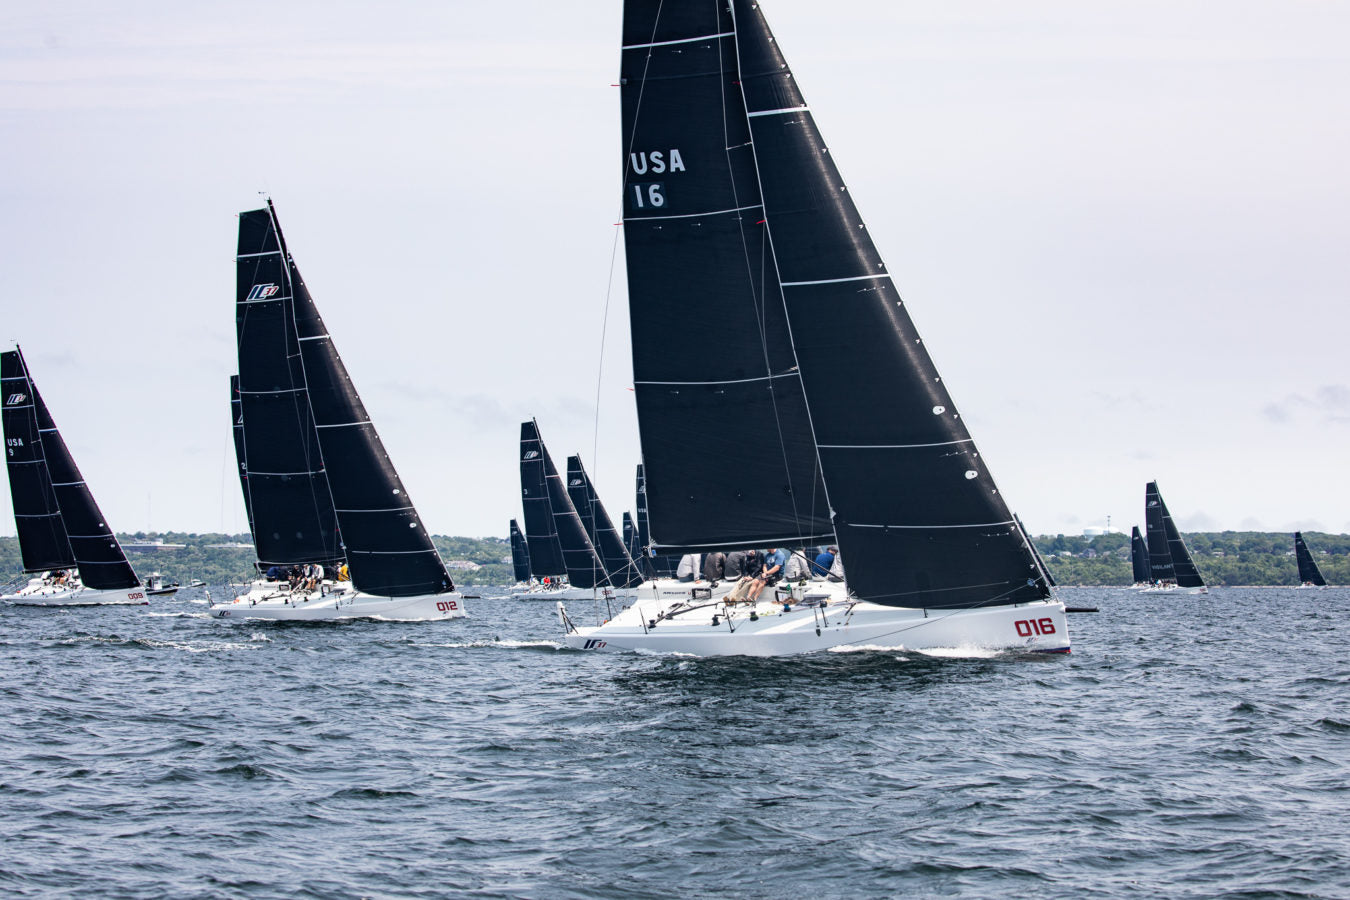 MELGES IC37 TIPS: VOLUME ONE